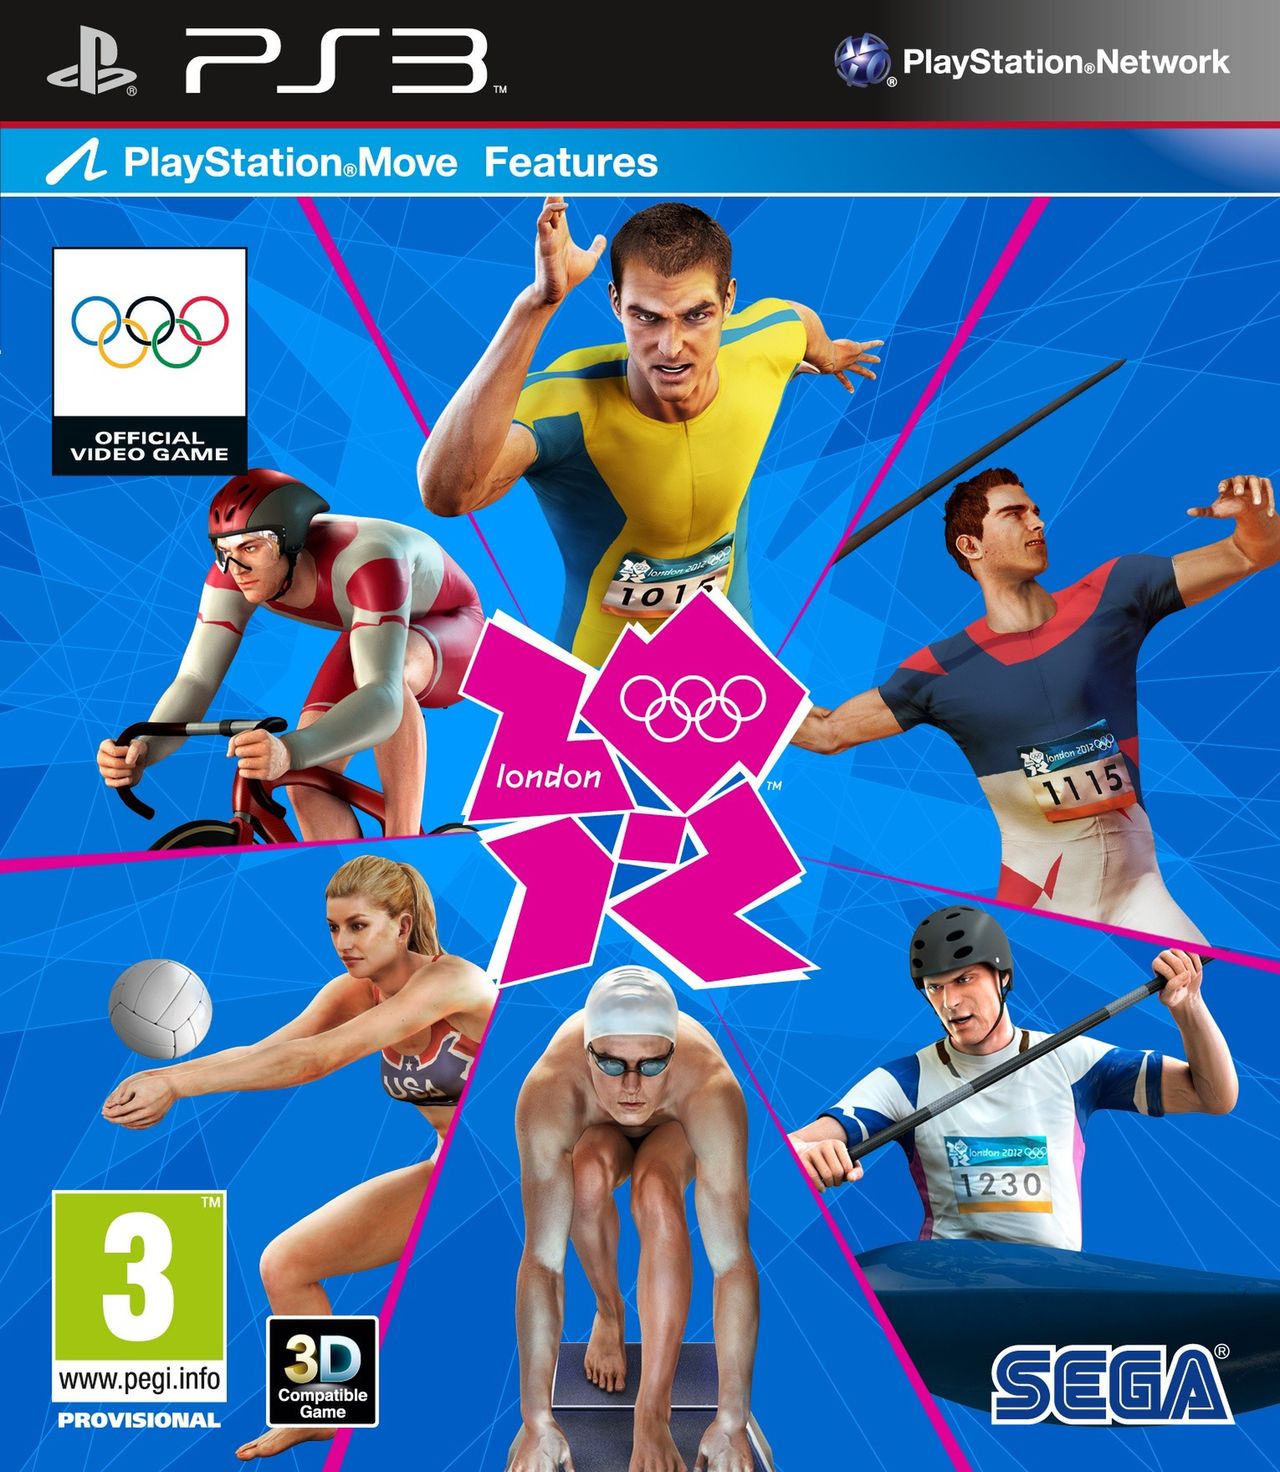 London 2012: The Official Video Game of the Olympic Games - recenzja